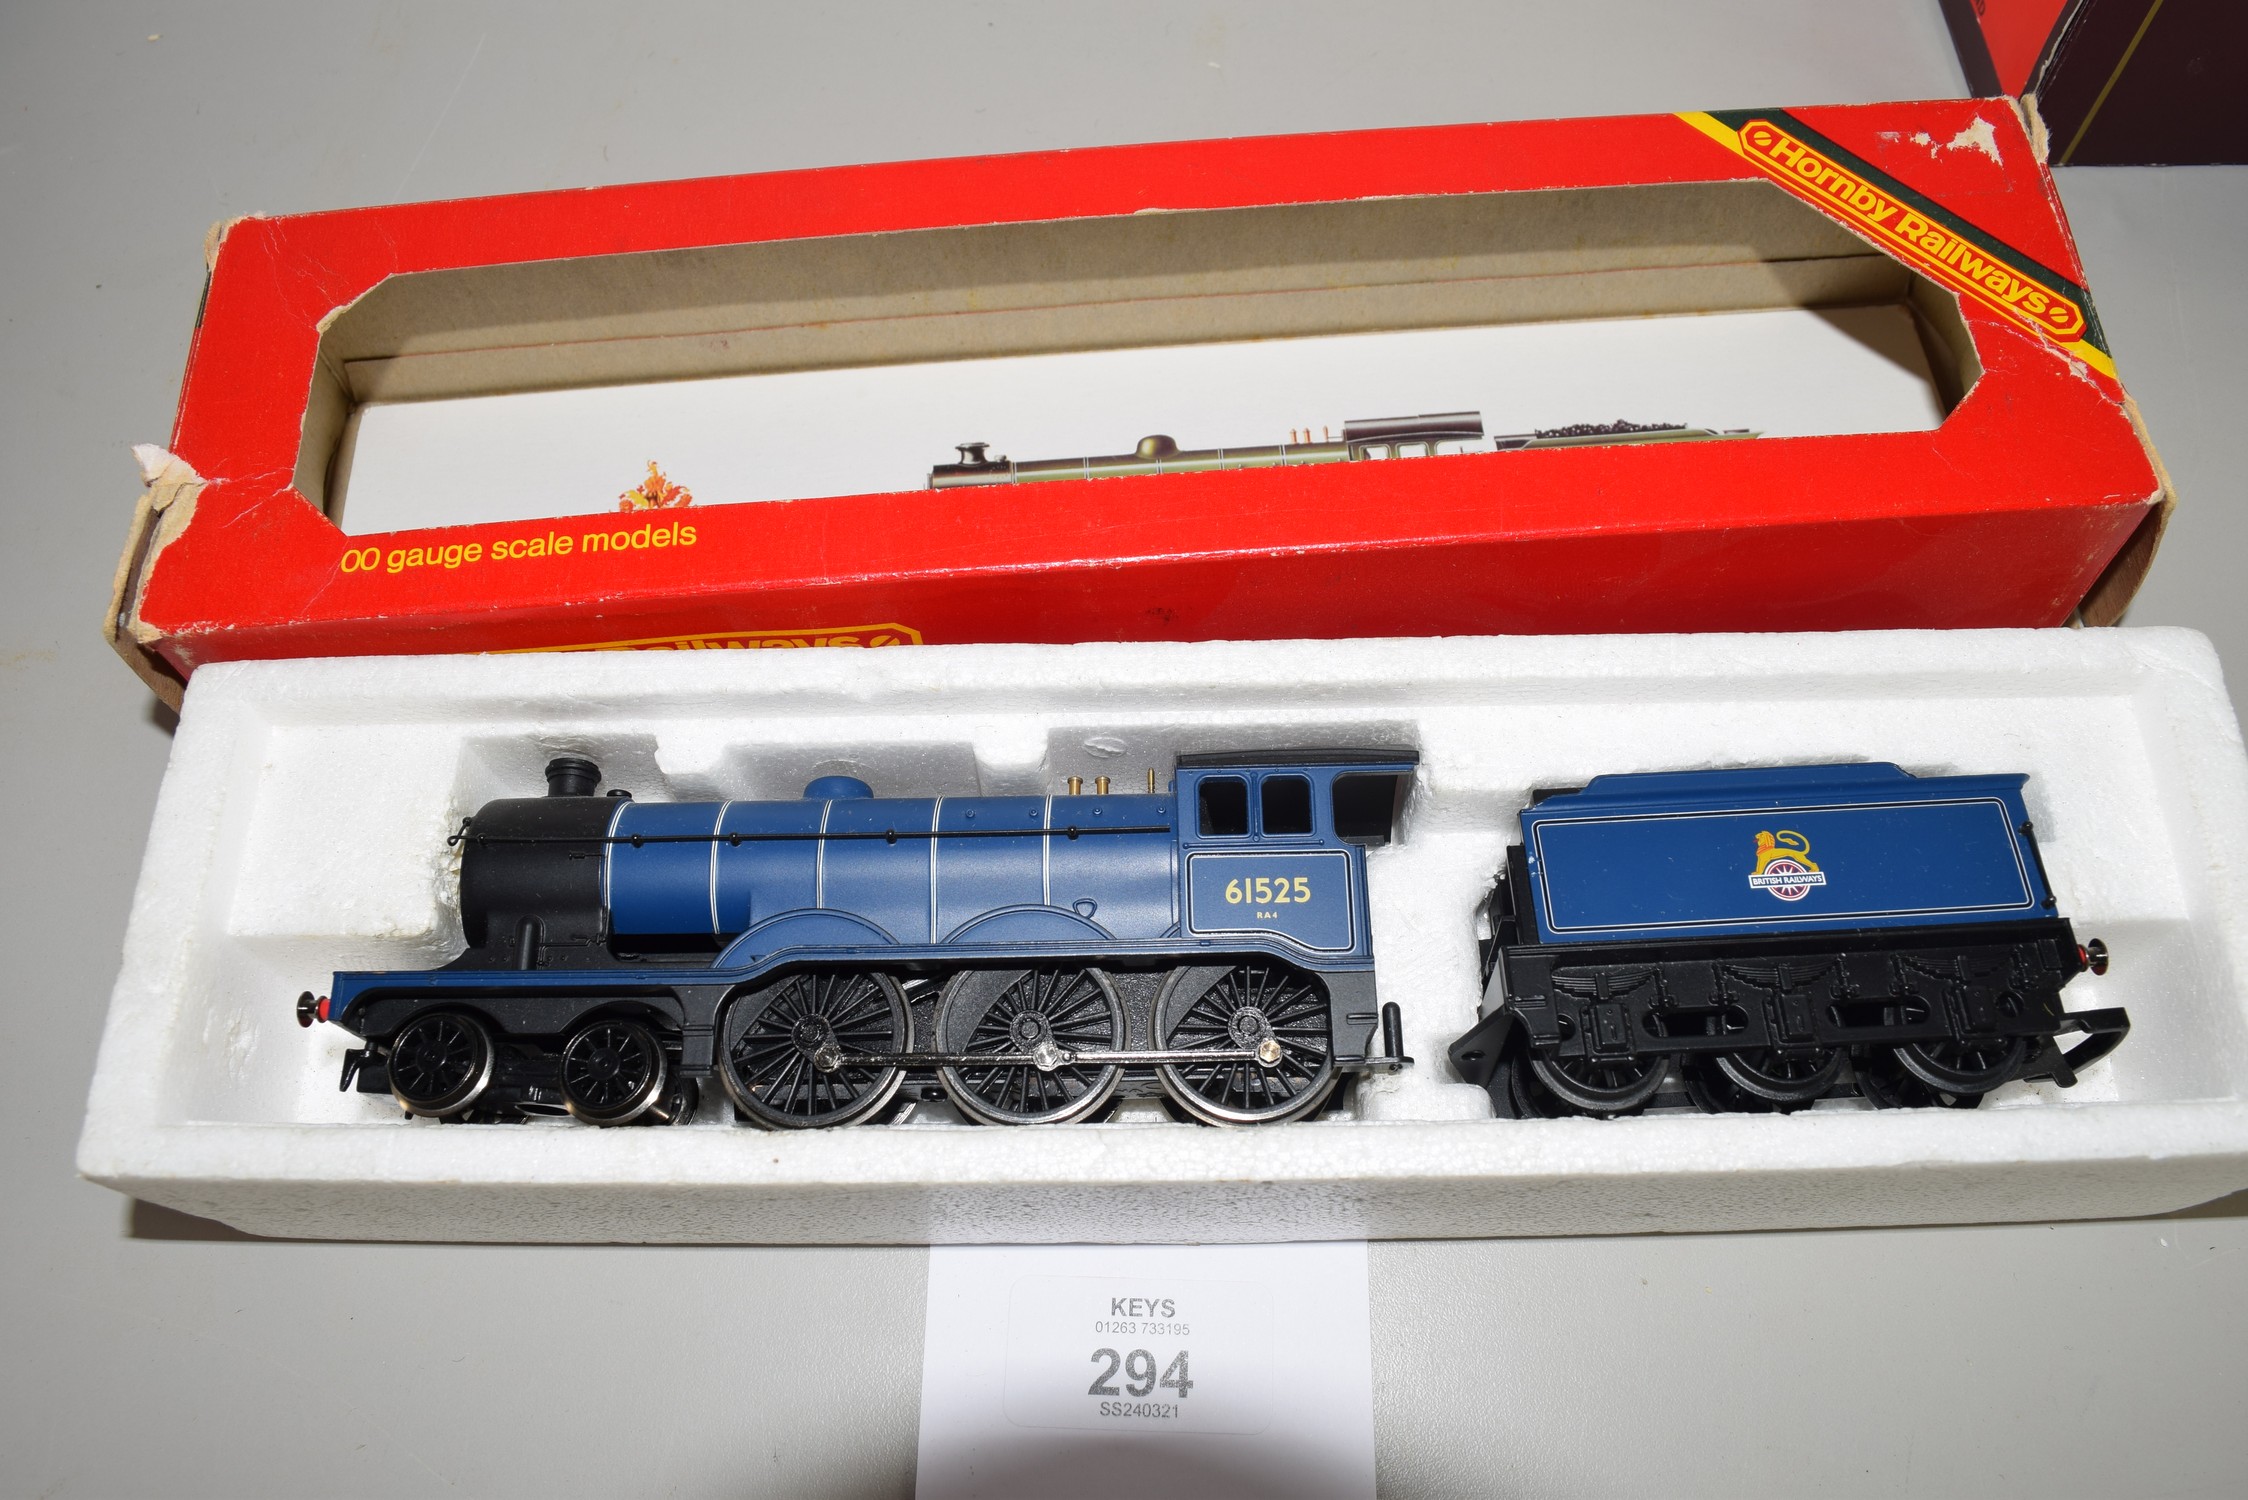 Boxed Hornby 00 gauge locomotive No 61525 (possibly incorrect box)